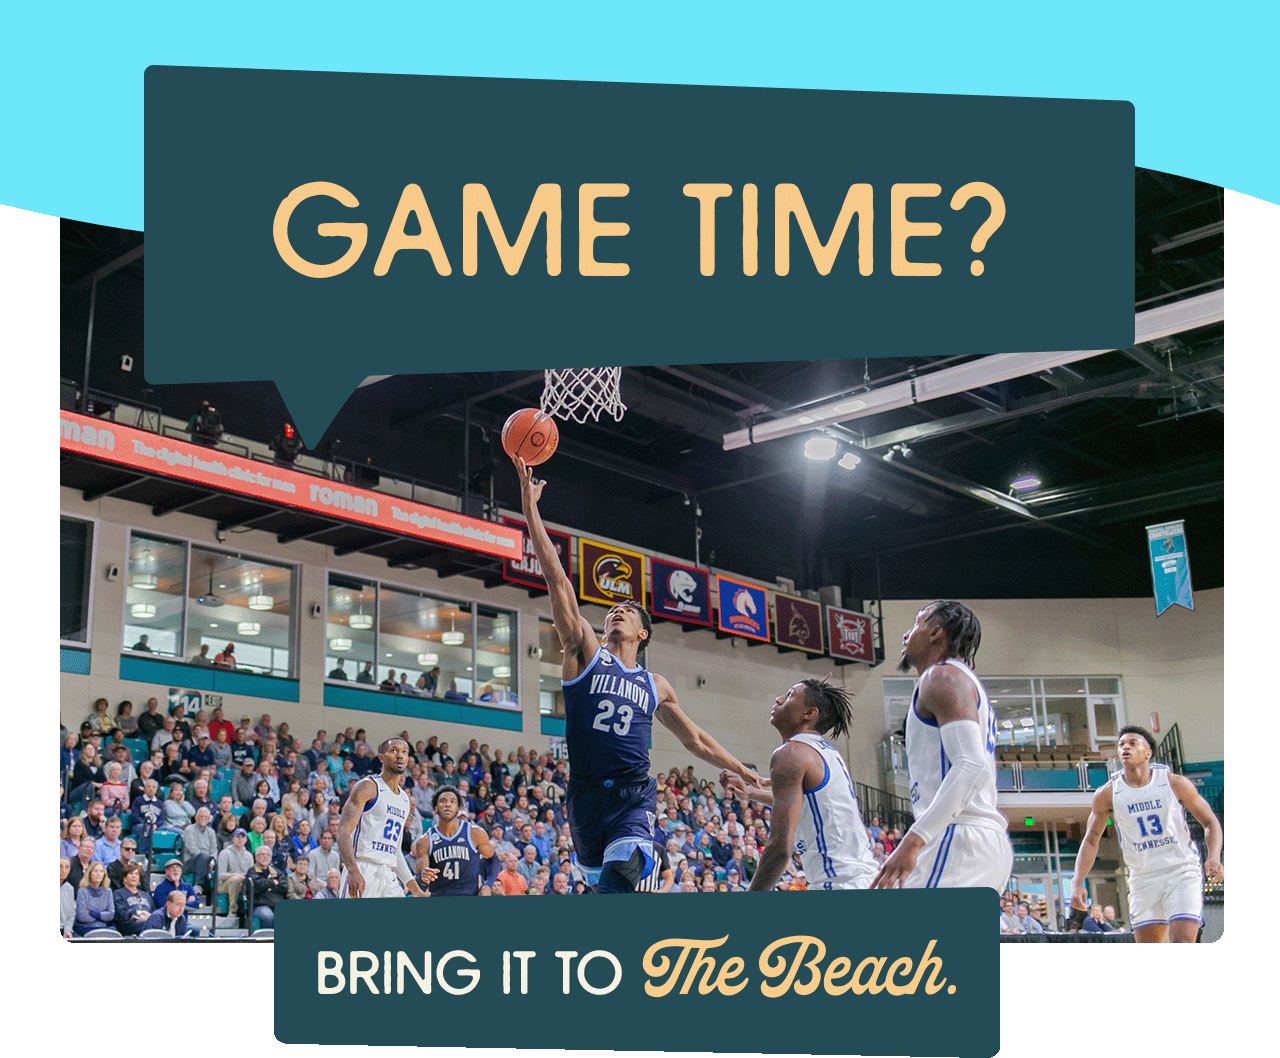 A basketball player going for a layup during a game with the crowd in the background. A headline reads: Game time? Bring it to the Beach.